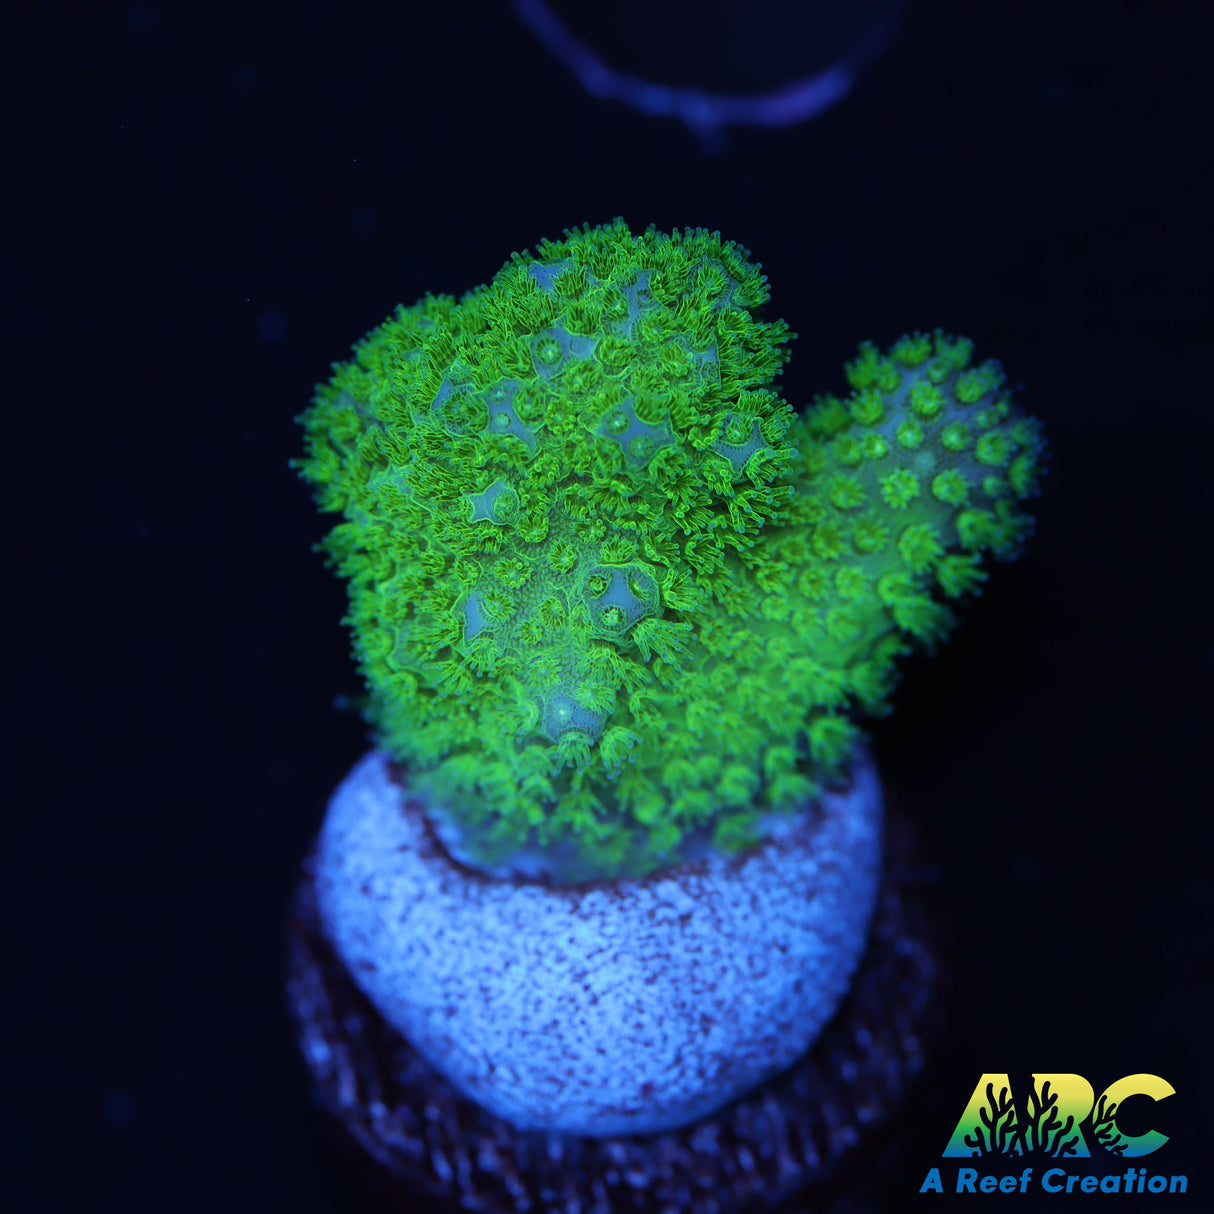 Green Cat's Paw Pocillopora